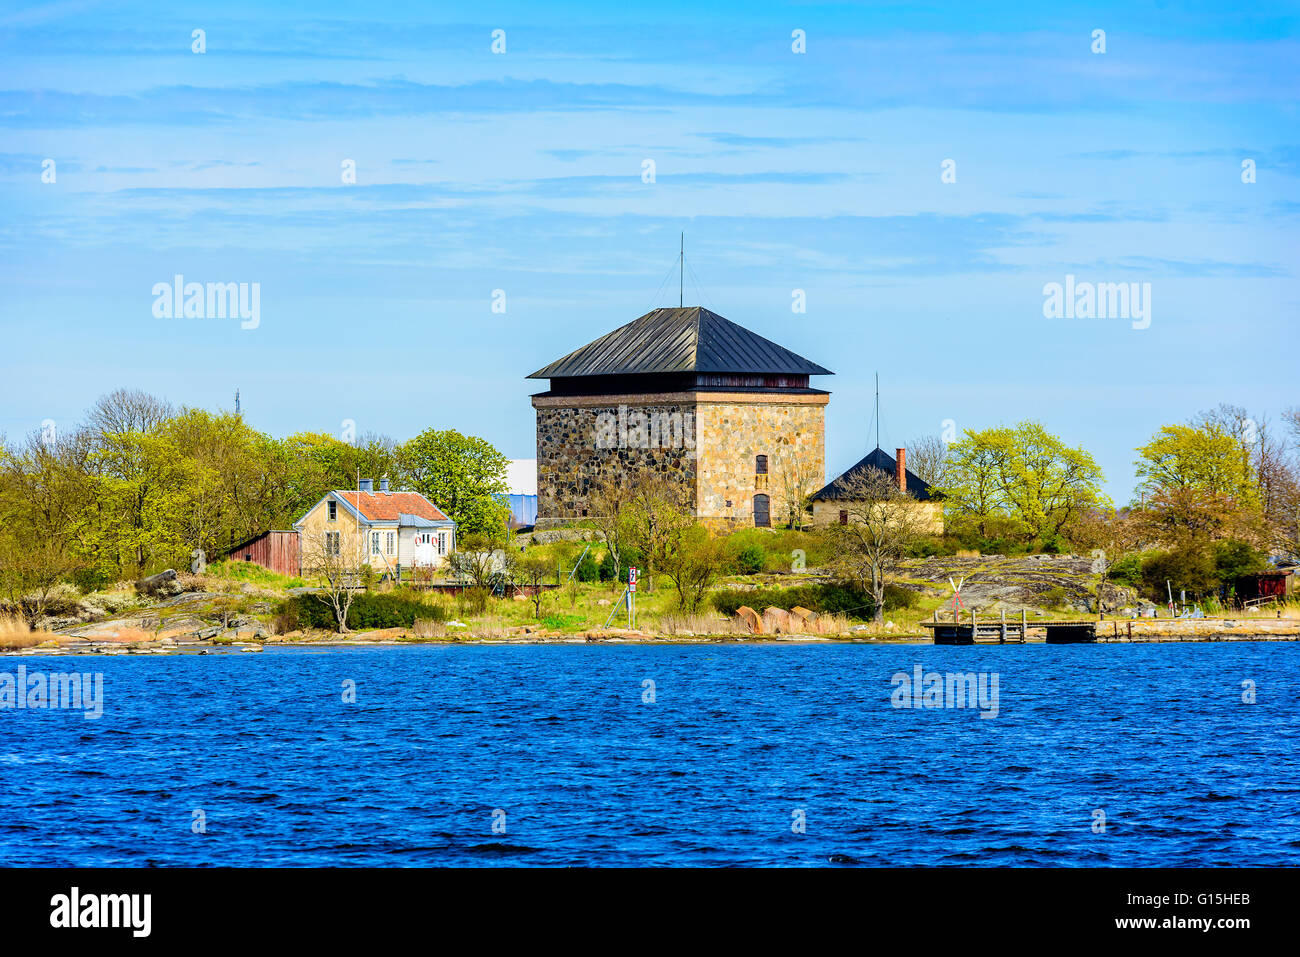 Karlskrona, Sweden - May 03, 2016: Lovely spring day with a scenic view over the Karlskrona archipelago as seen from the harbor. Stock Photo